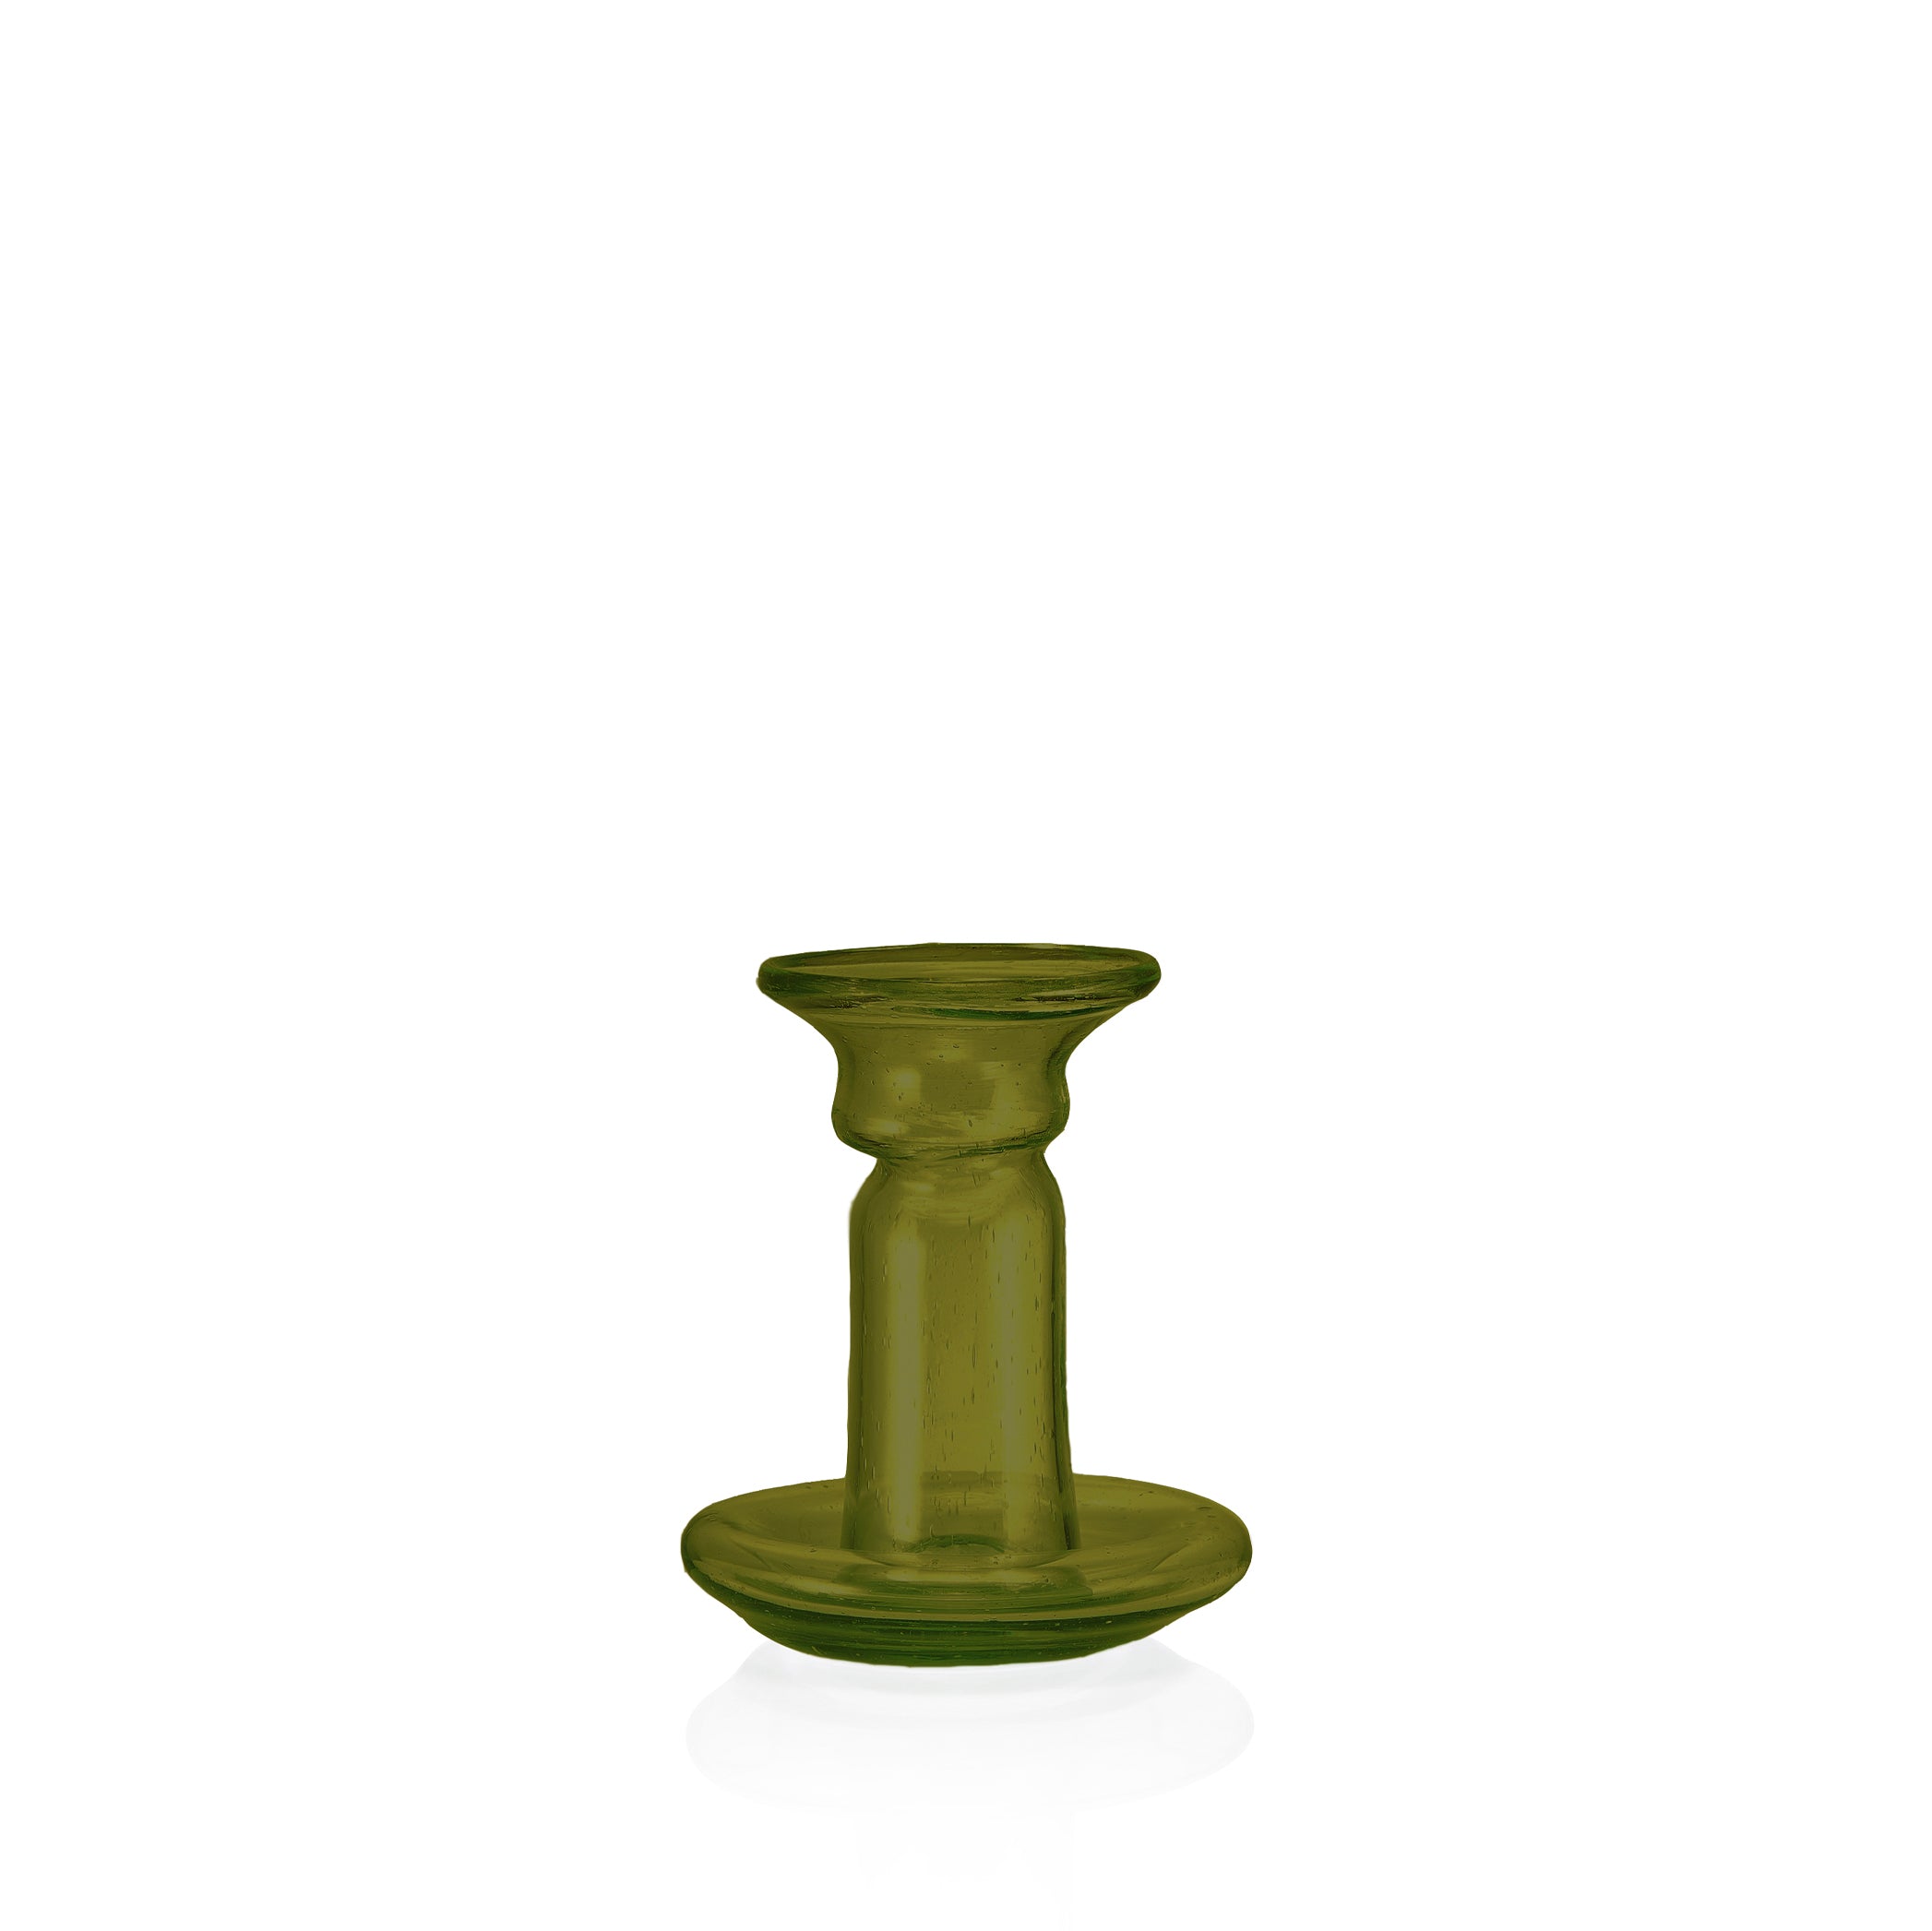 Handblown Small Glass Candlestick in Olive Green, 11cm